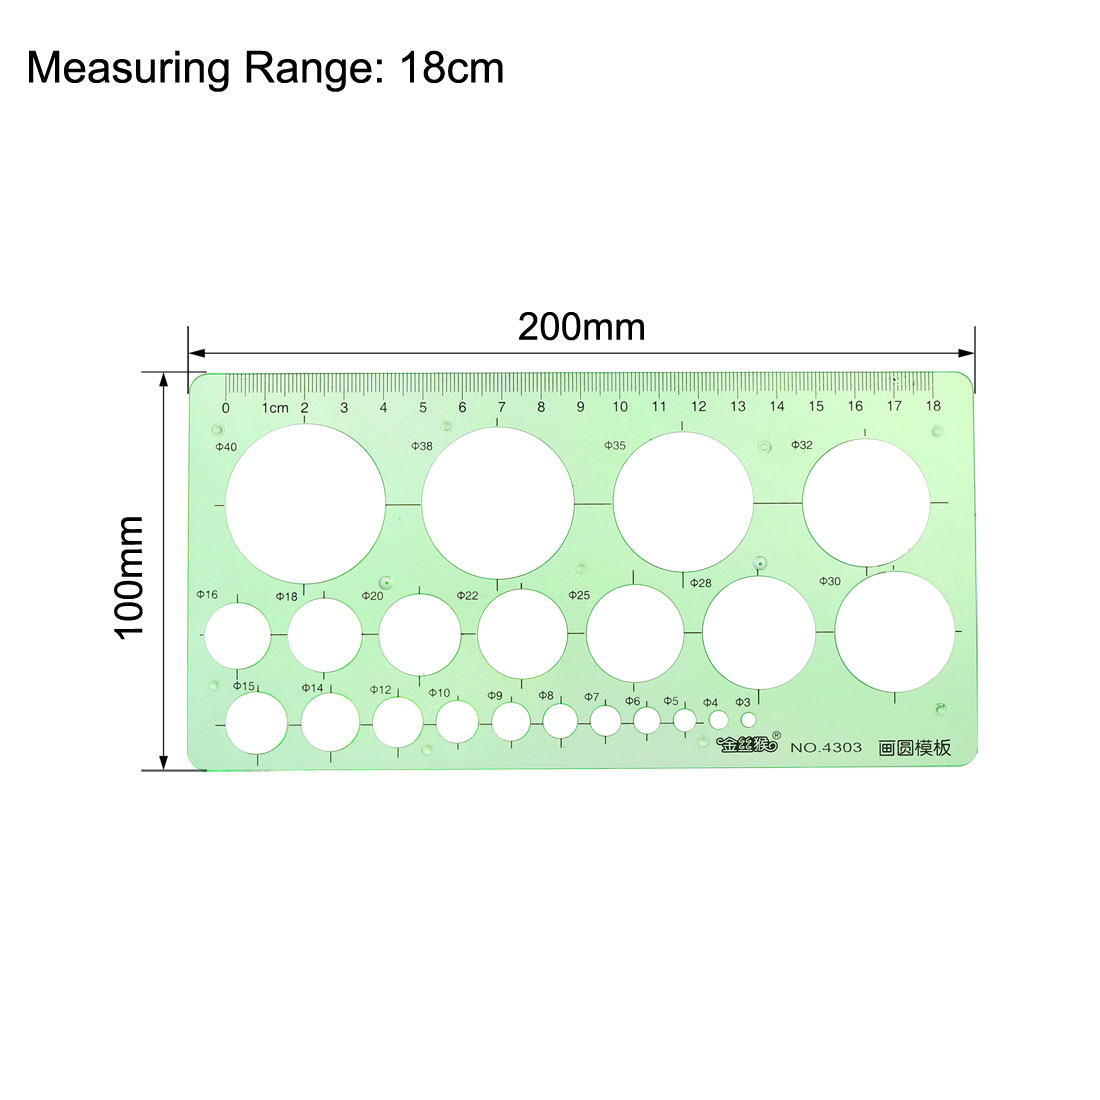 uxcell 2pcs Geometric Drawing Template Measuring Ruler 20cm 18cm Plastic for Engineering Art Design and Building Formwork